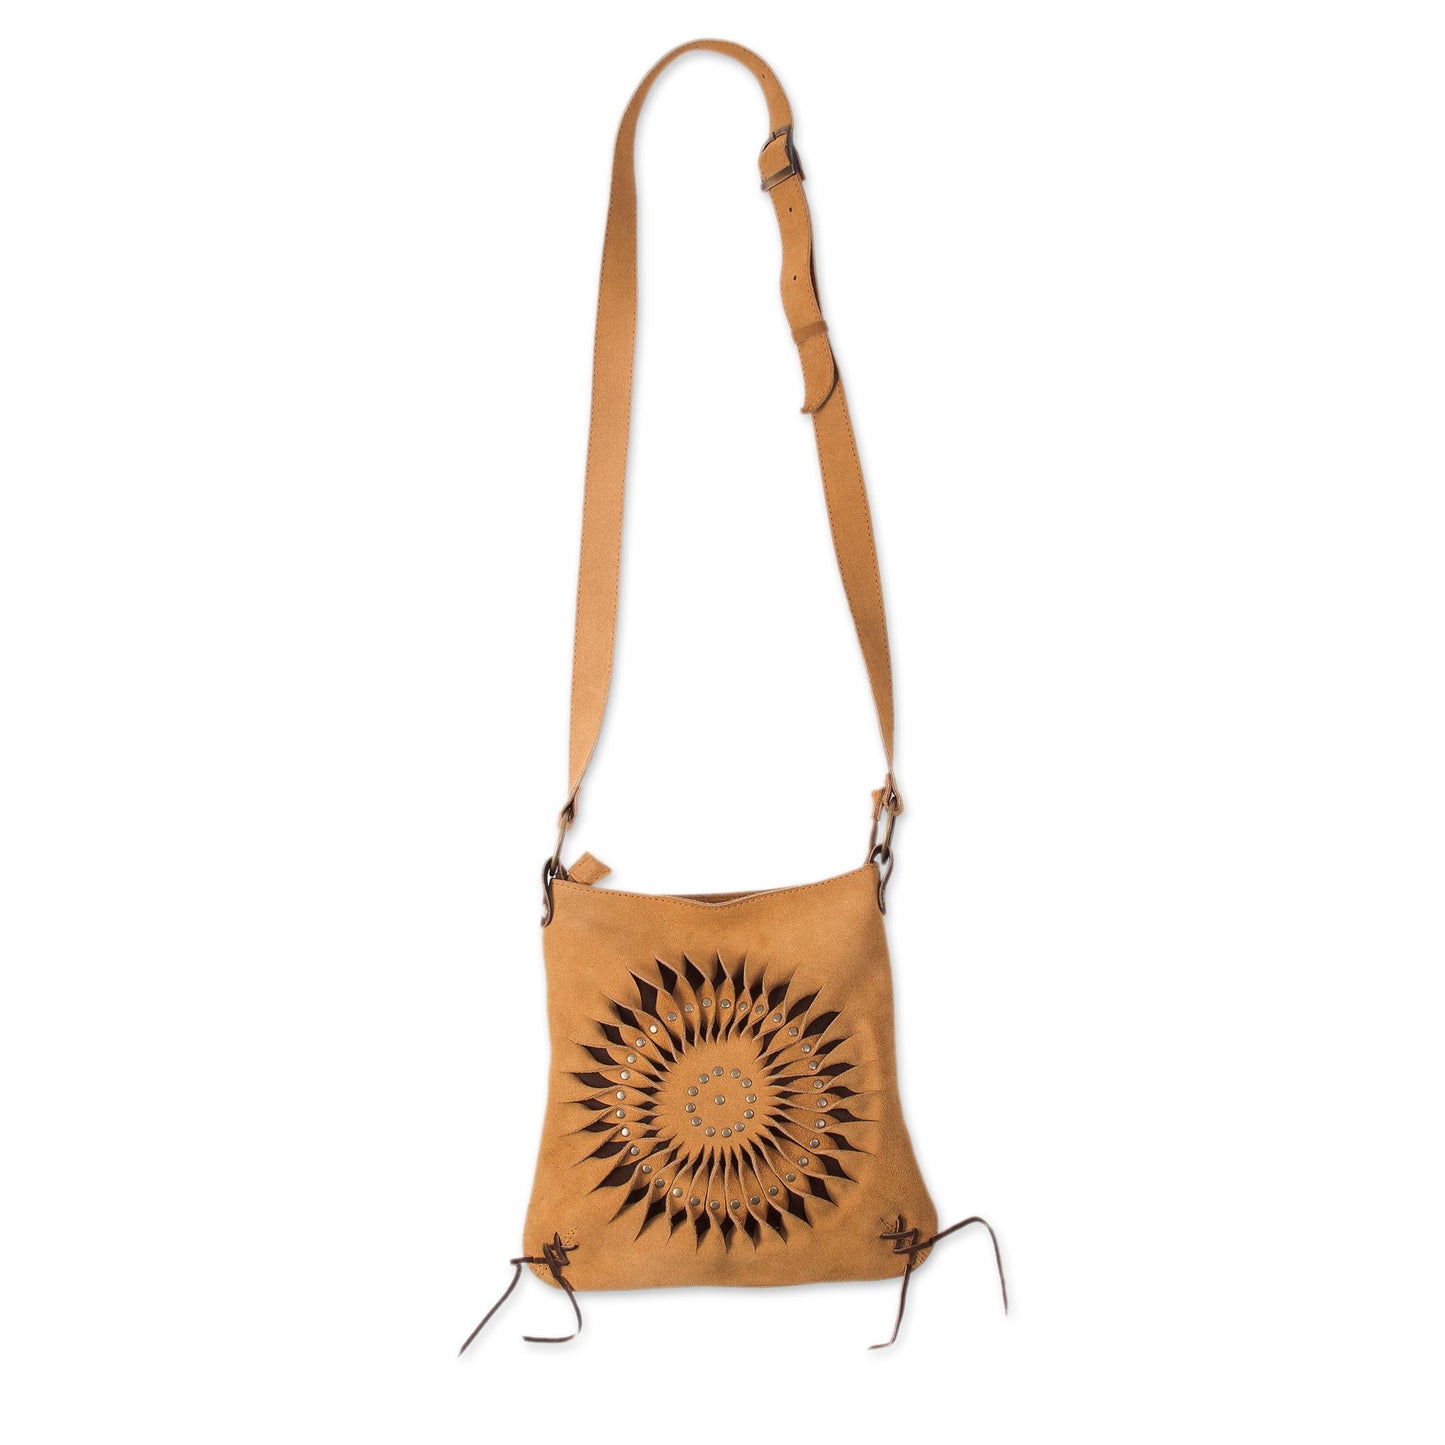 Lively Spiral in Caramel Handcrafted Suede Sling in Caramel from Peru